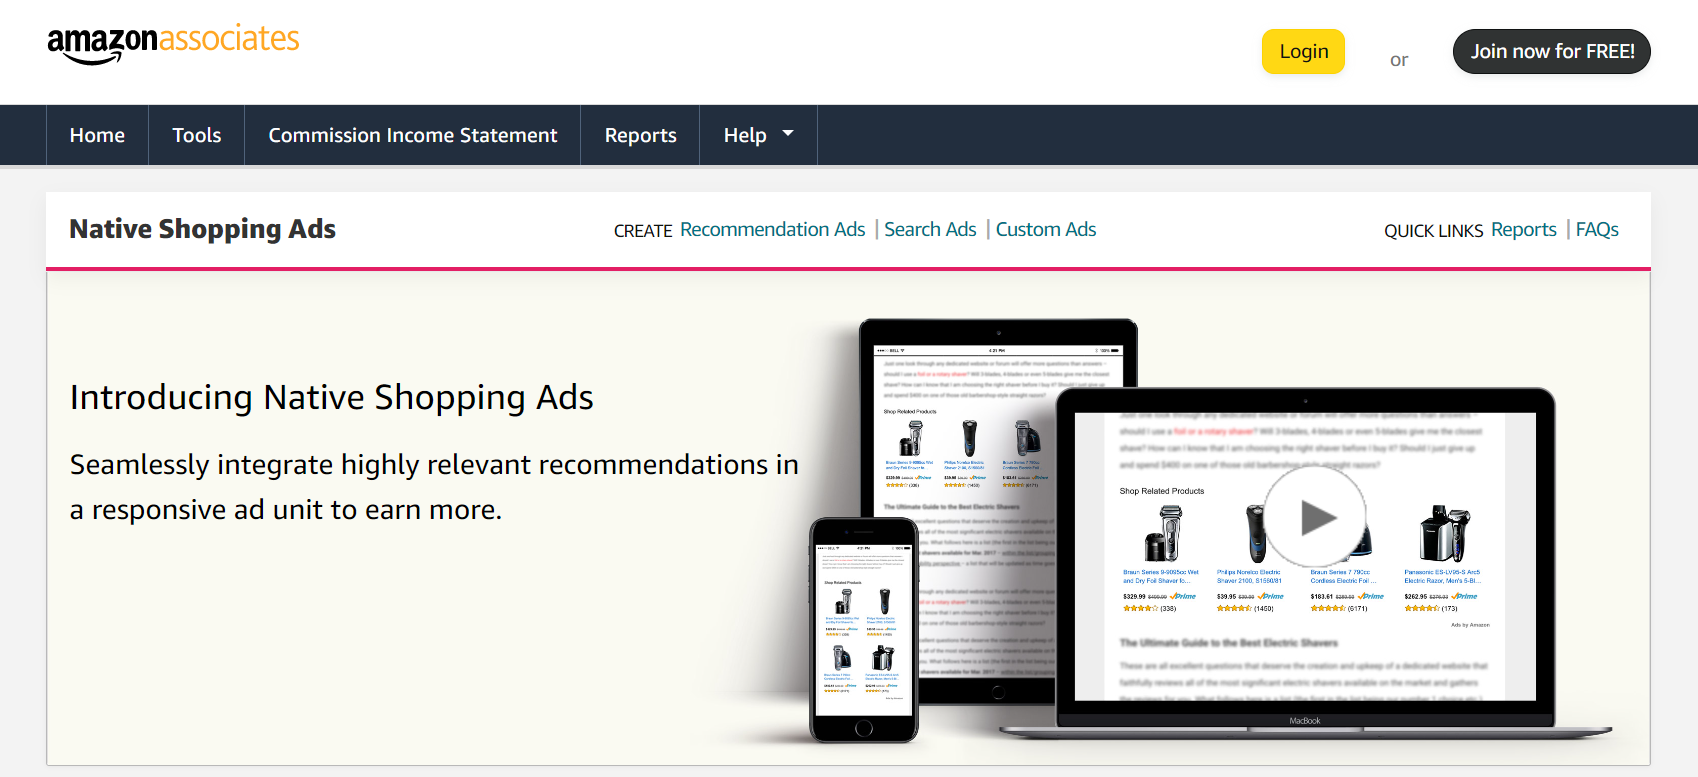 Amazon Native Shopping Ads Services